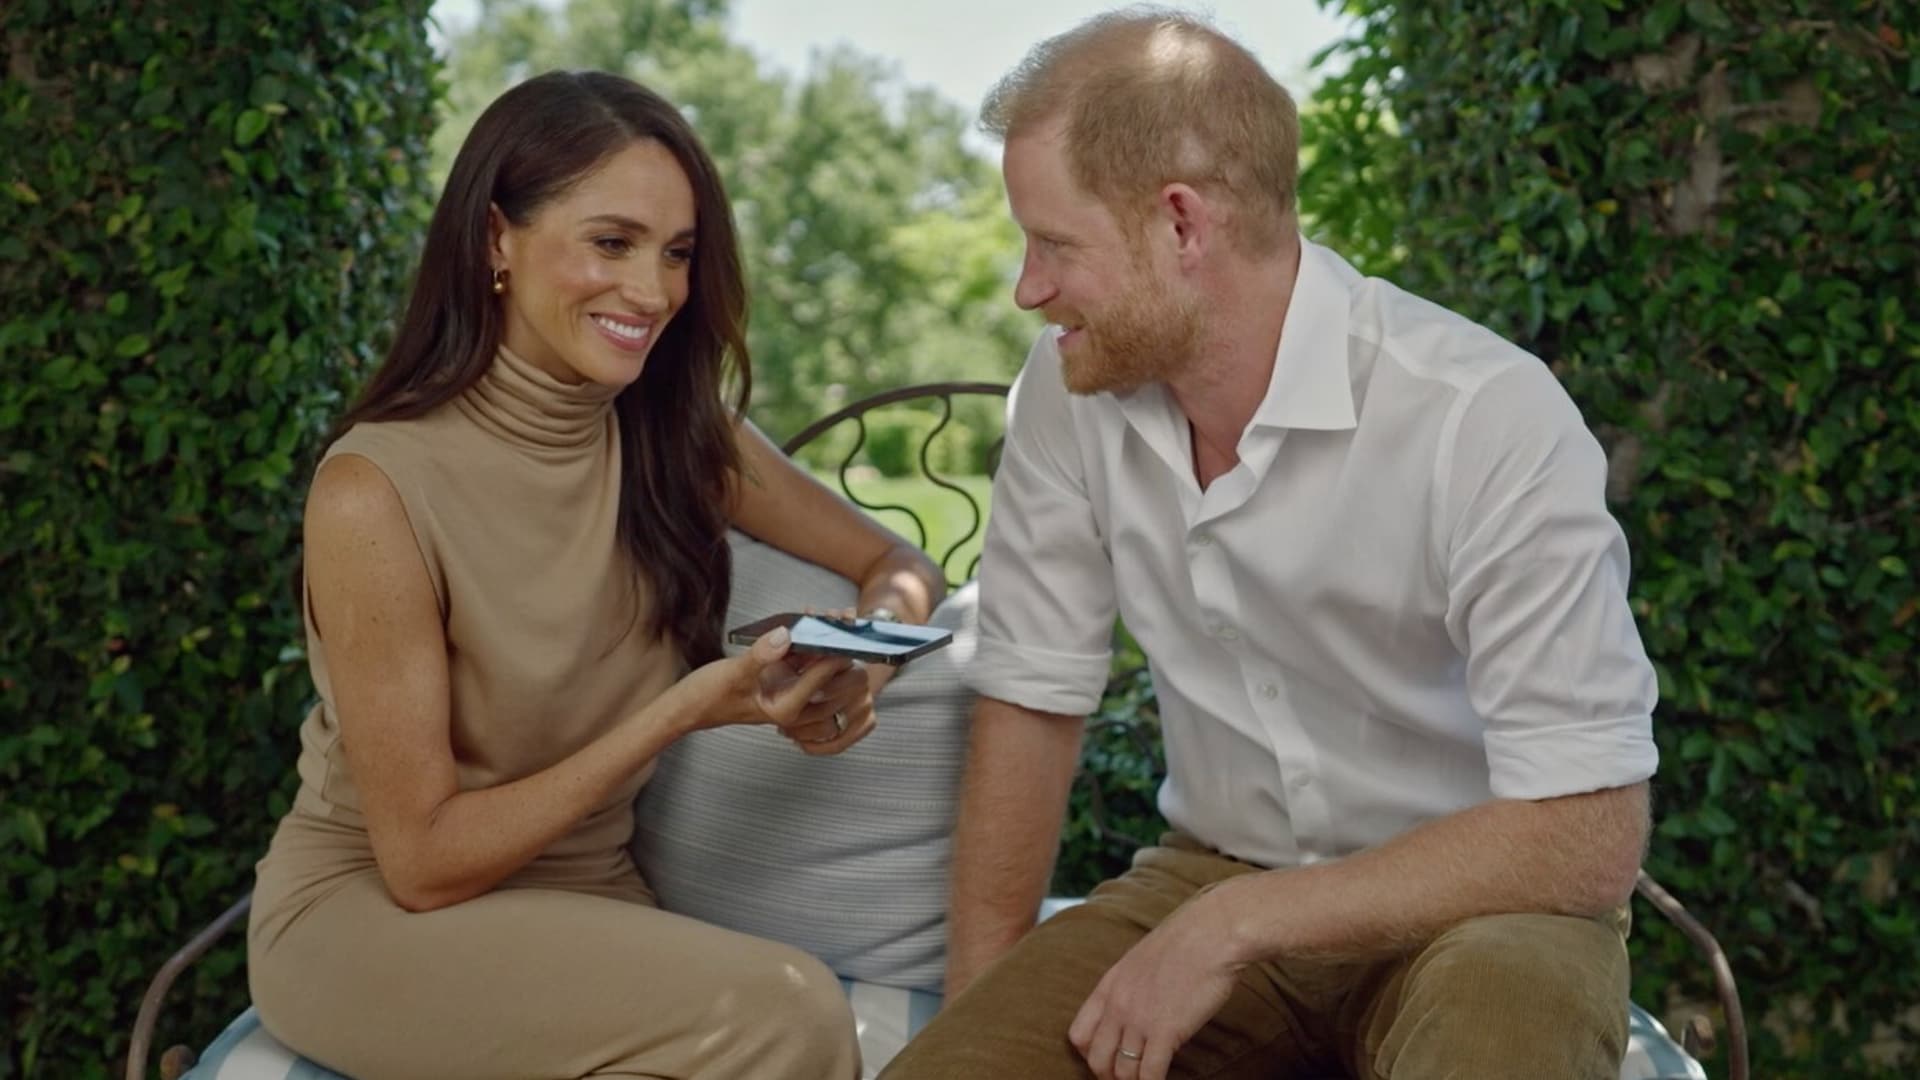 meghan markle and prince harry appear in new video together